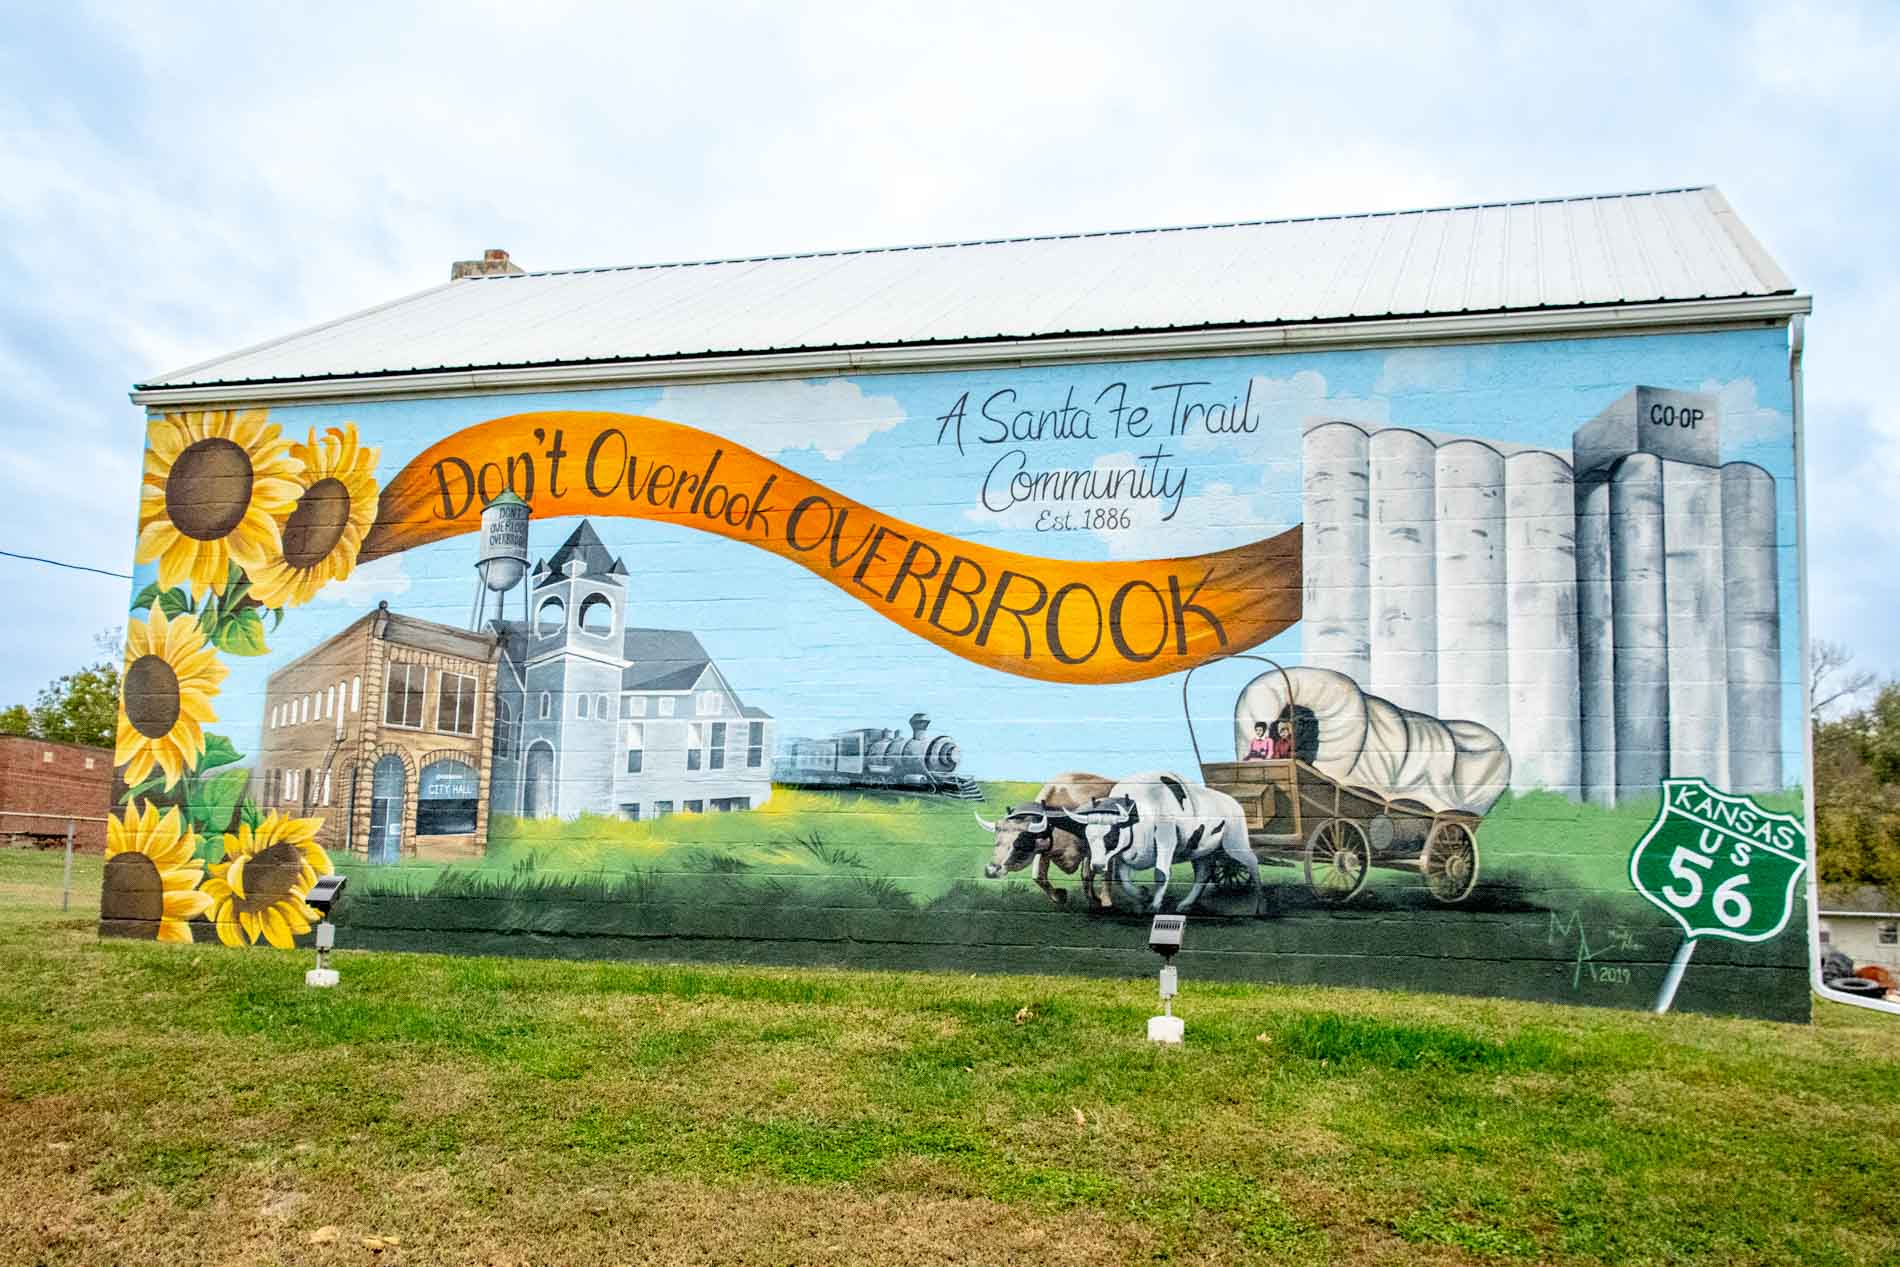 Mural on side of building that says "Don't Overlook Overbrook - A Santa Fe Trail Community Est 1886"